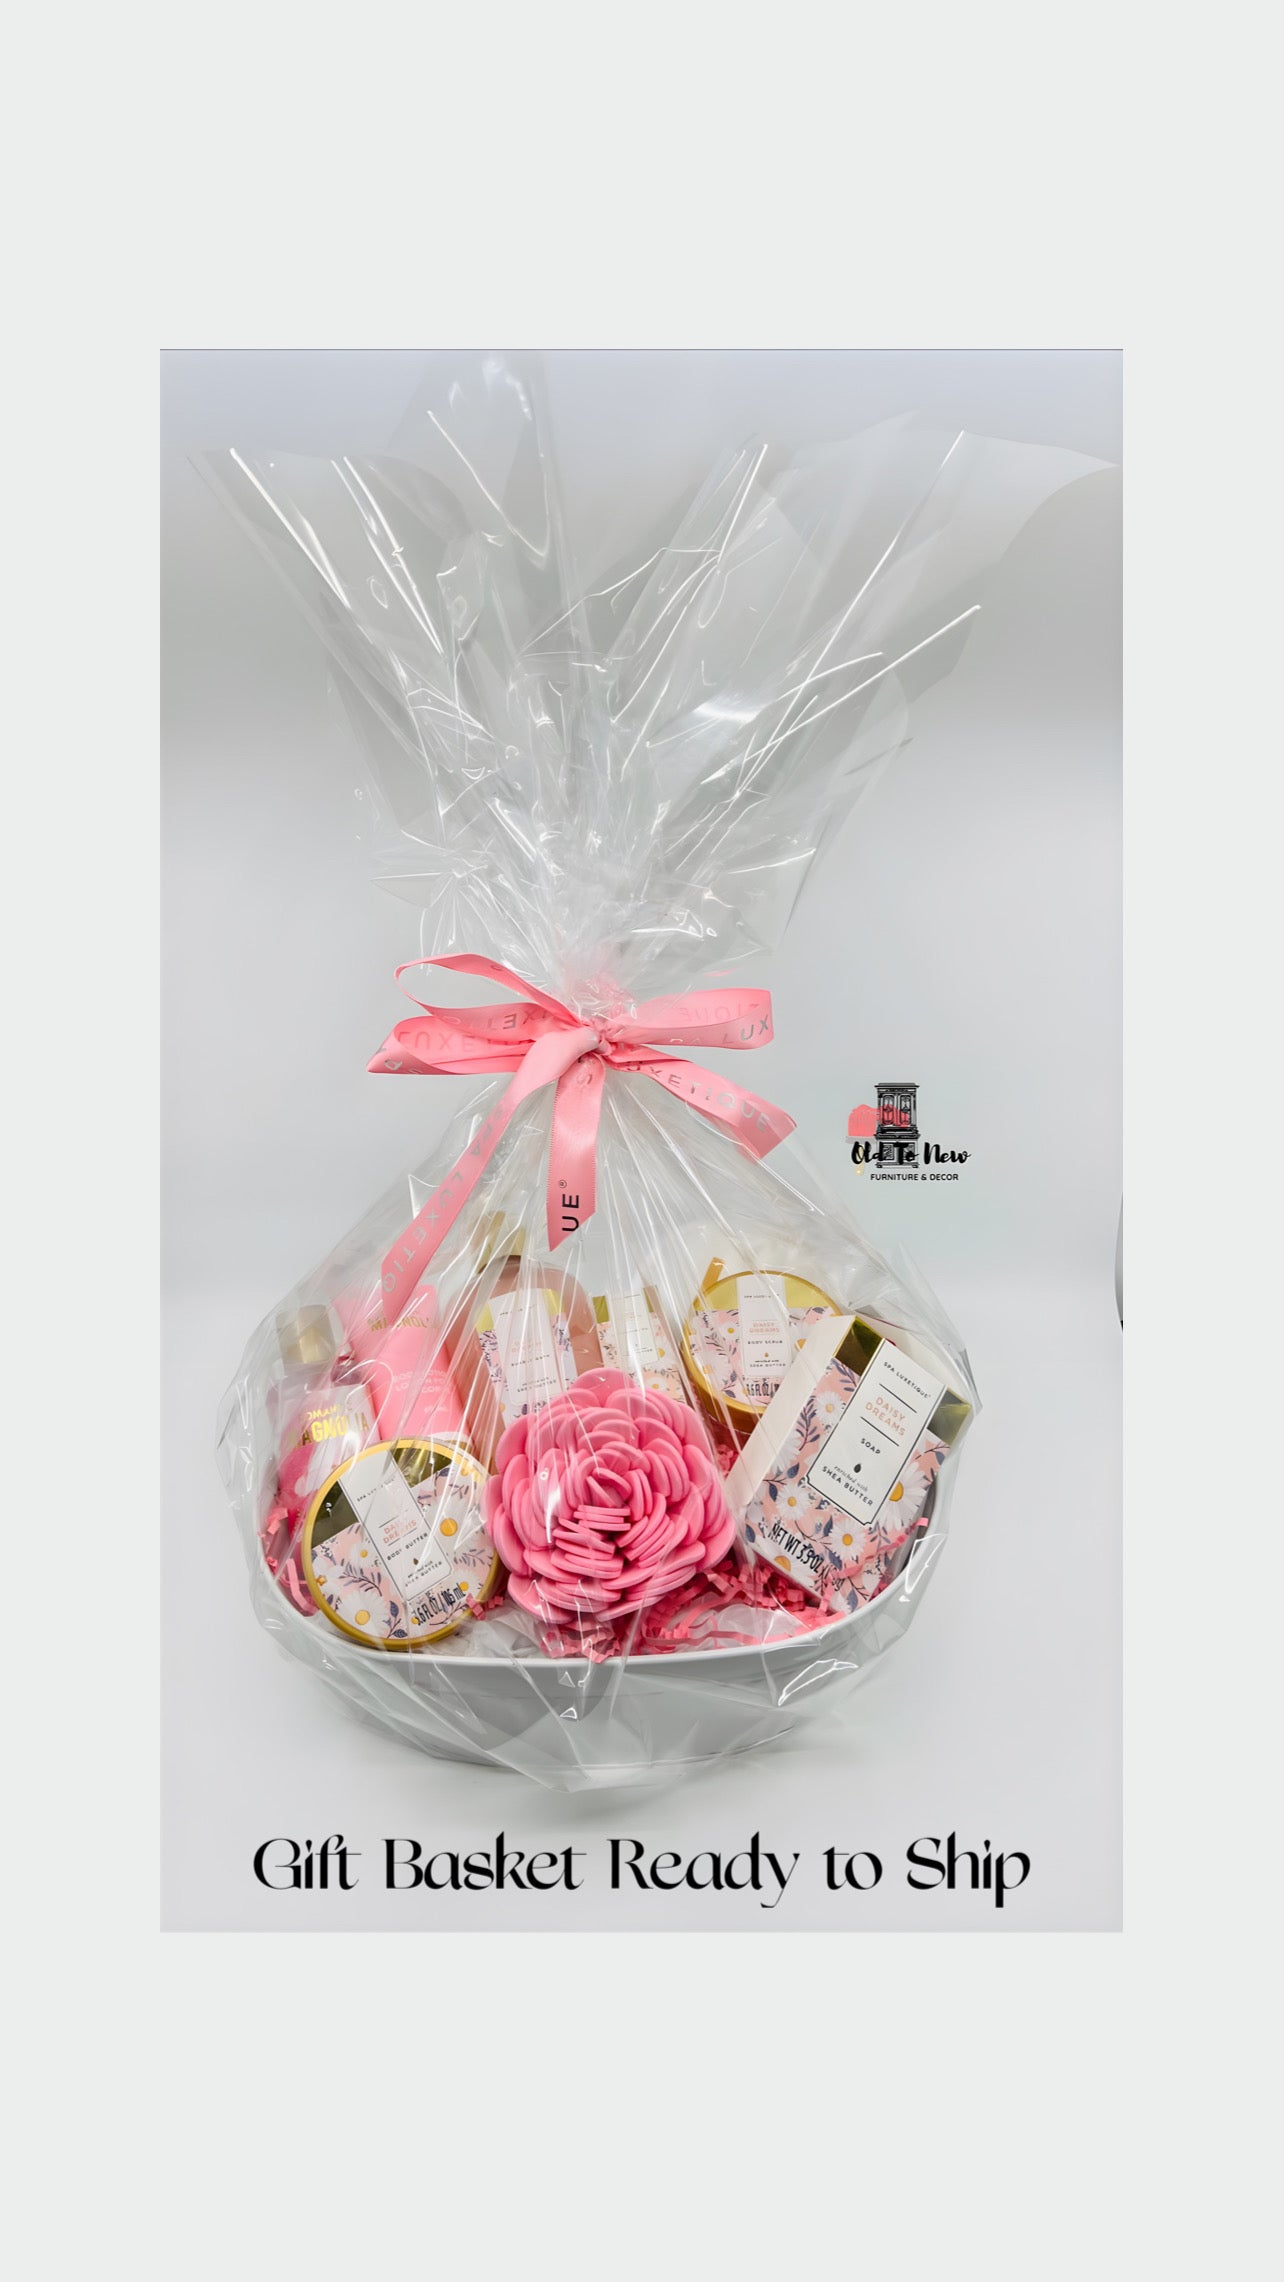 Daisy Dream & Magnolia Spa Gift Basket, Perfect for Birthday, Mothers Day or A Gift For Her.